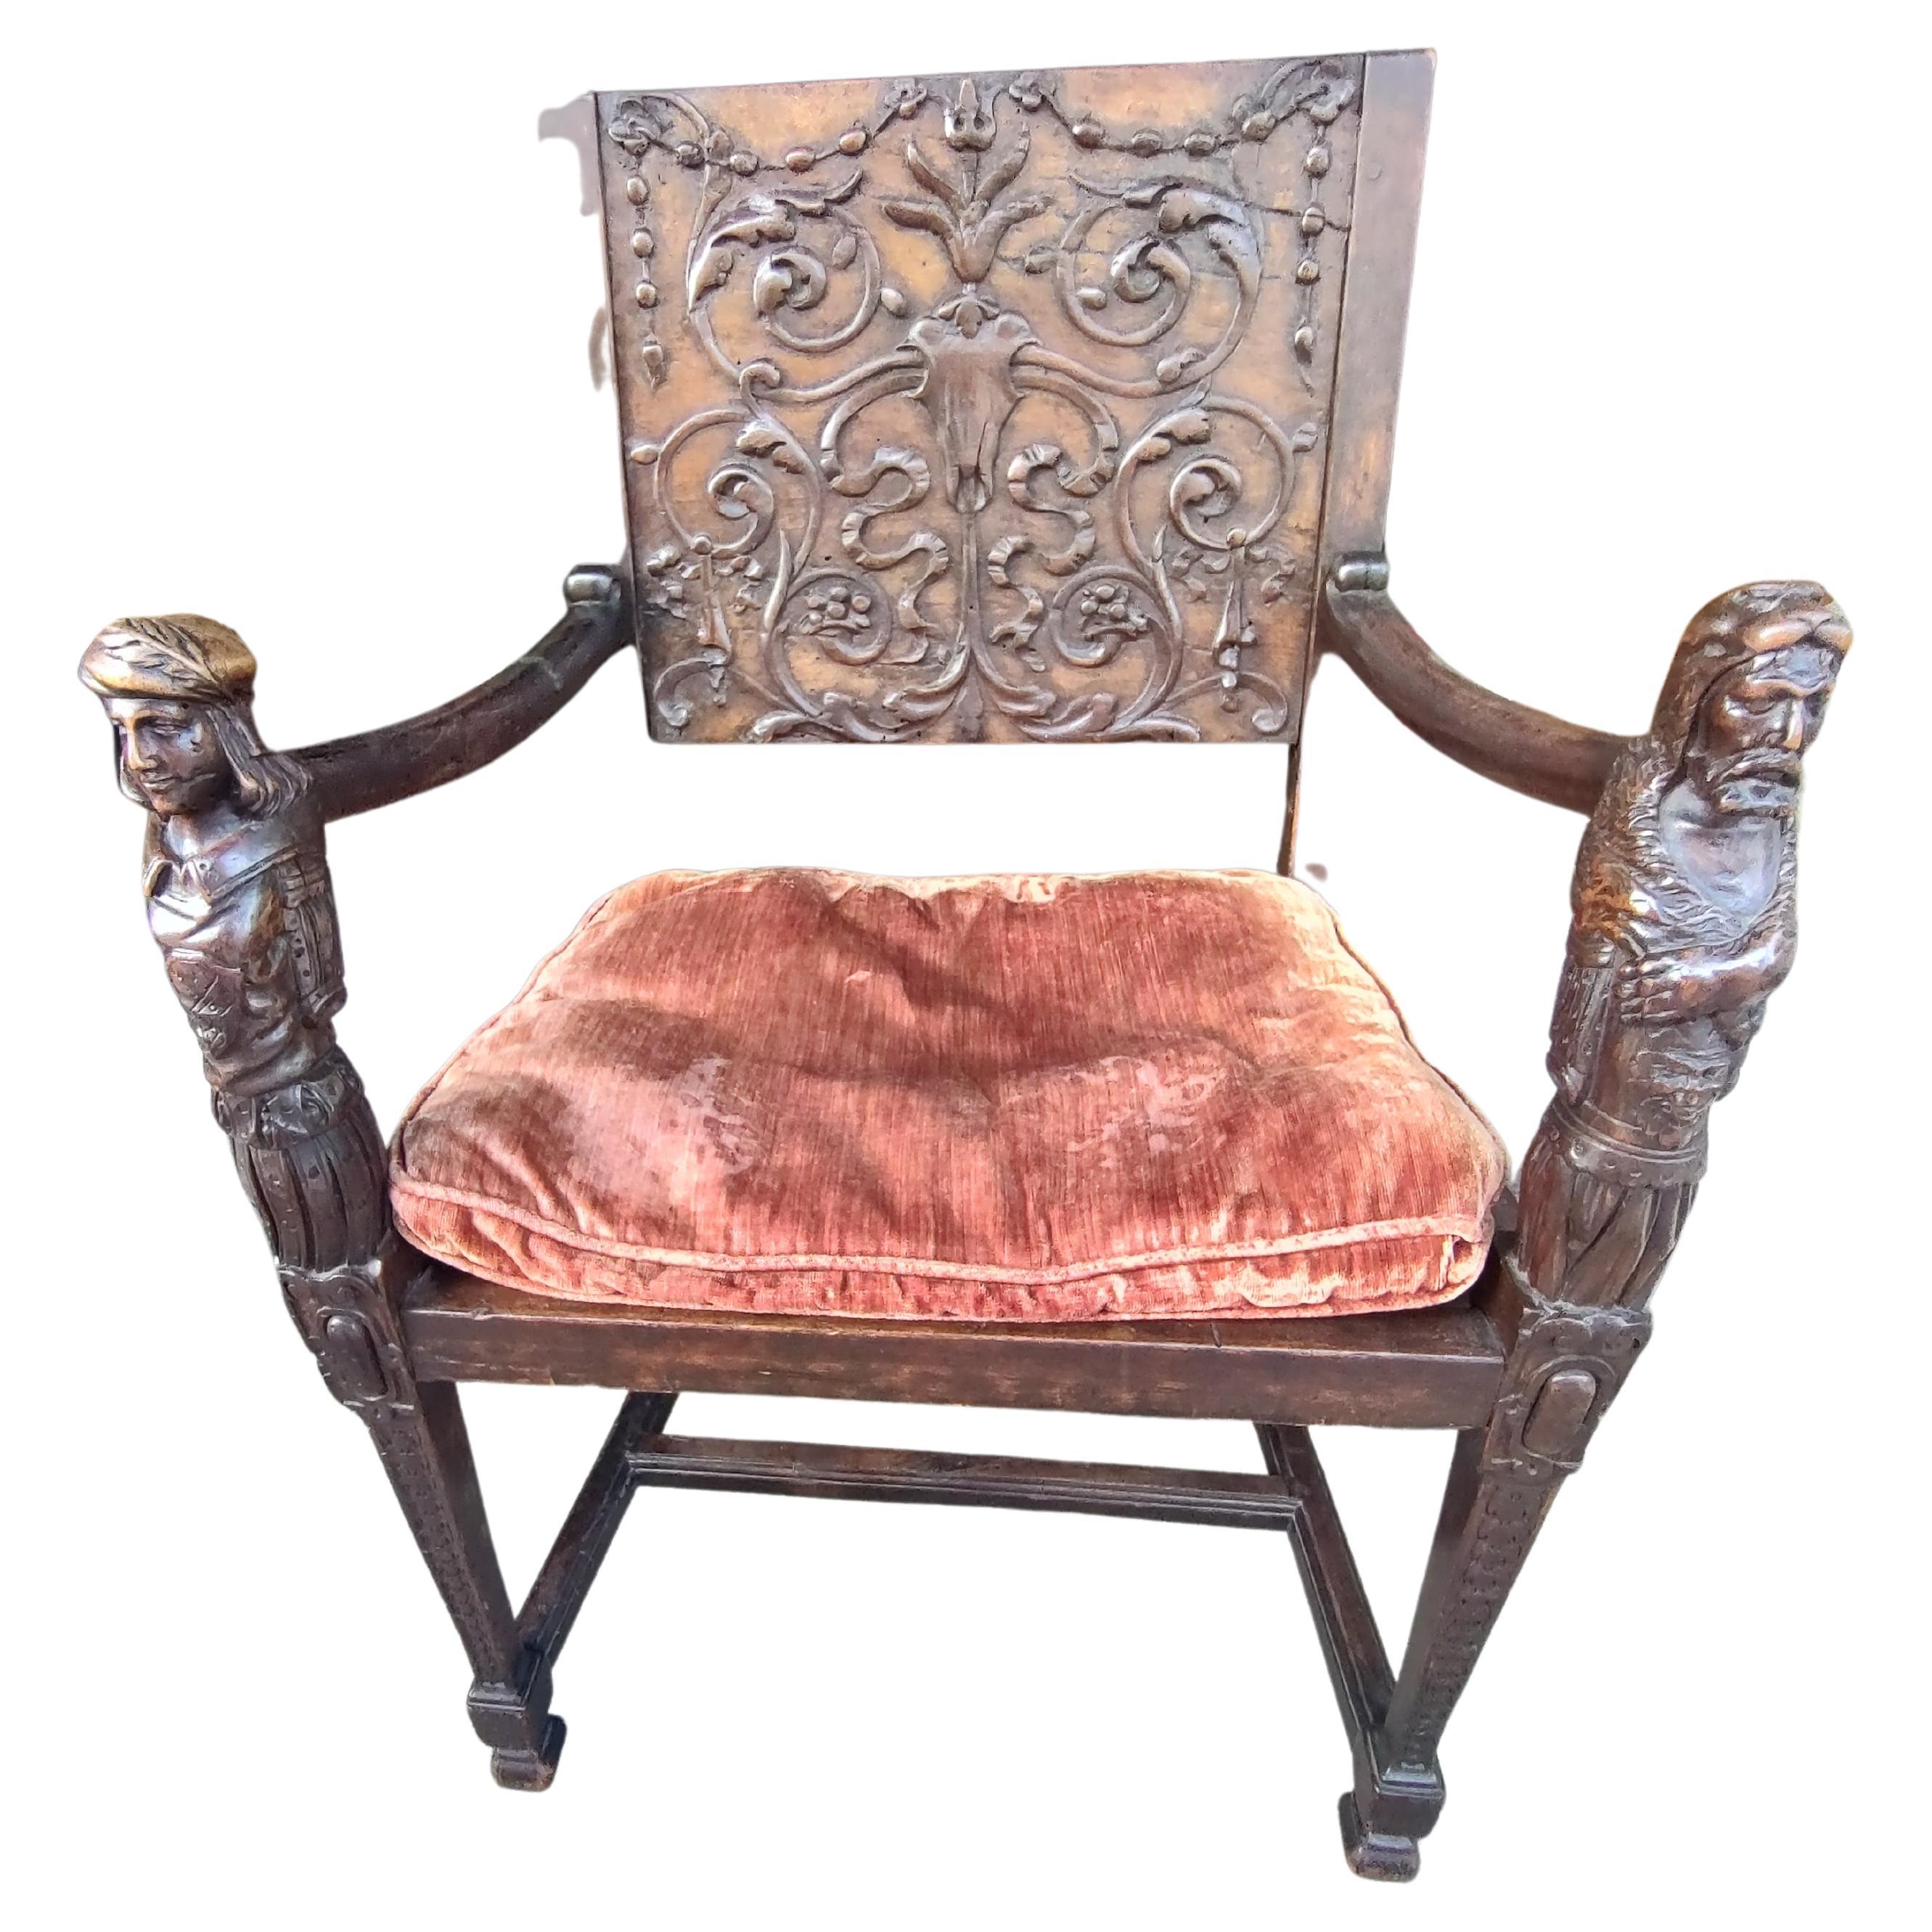 Early 18th Century Hand Carved with Figures Italian Renaissance Armchair